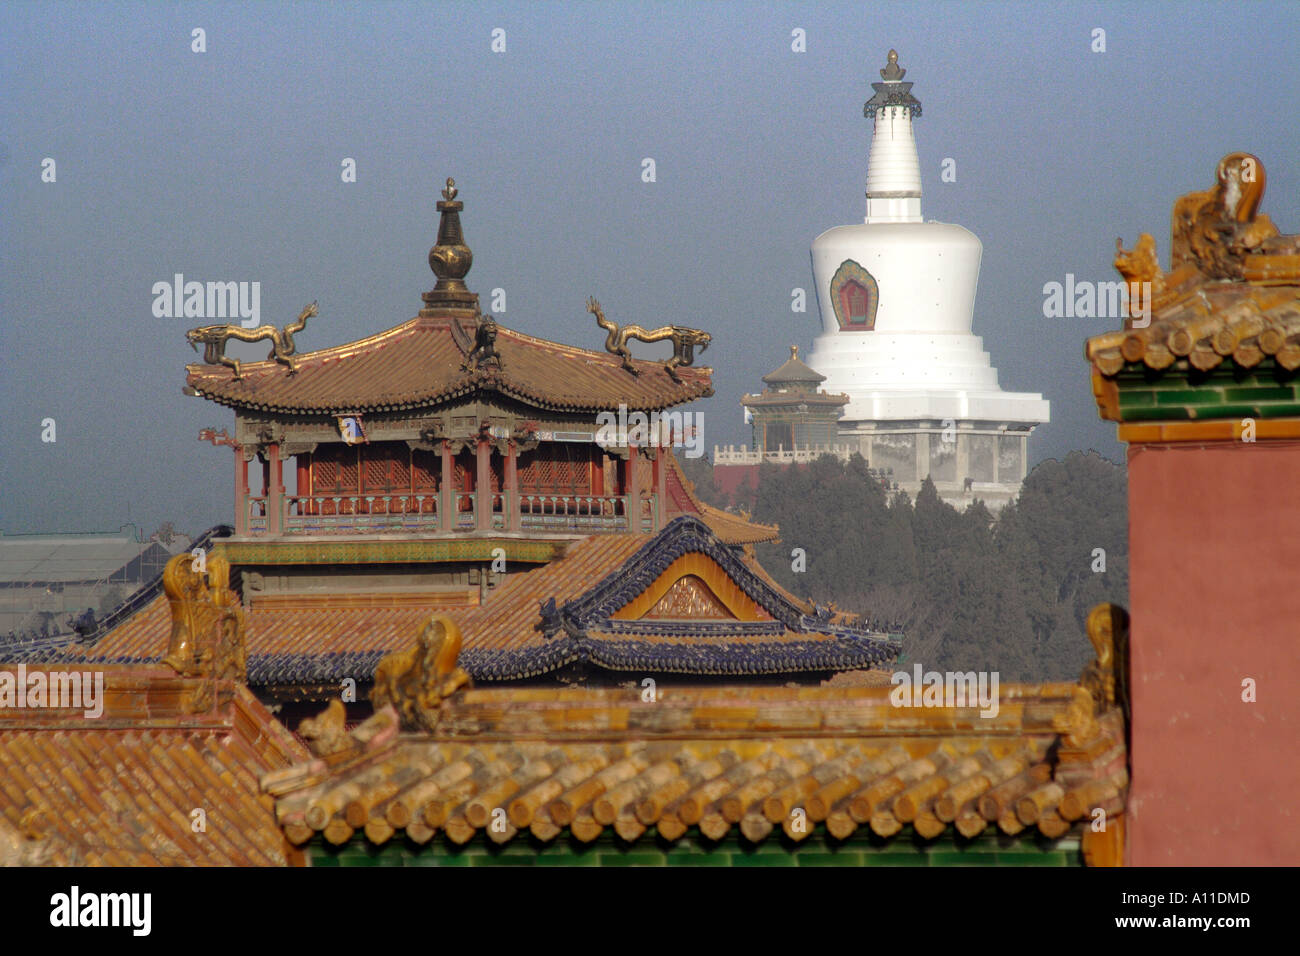 Rooftops and towers of the Forbidden City with the Baitai White Dagoba in the  background, Beijing, China Stock Photo